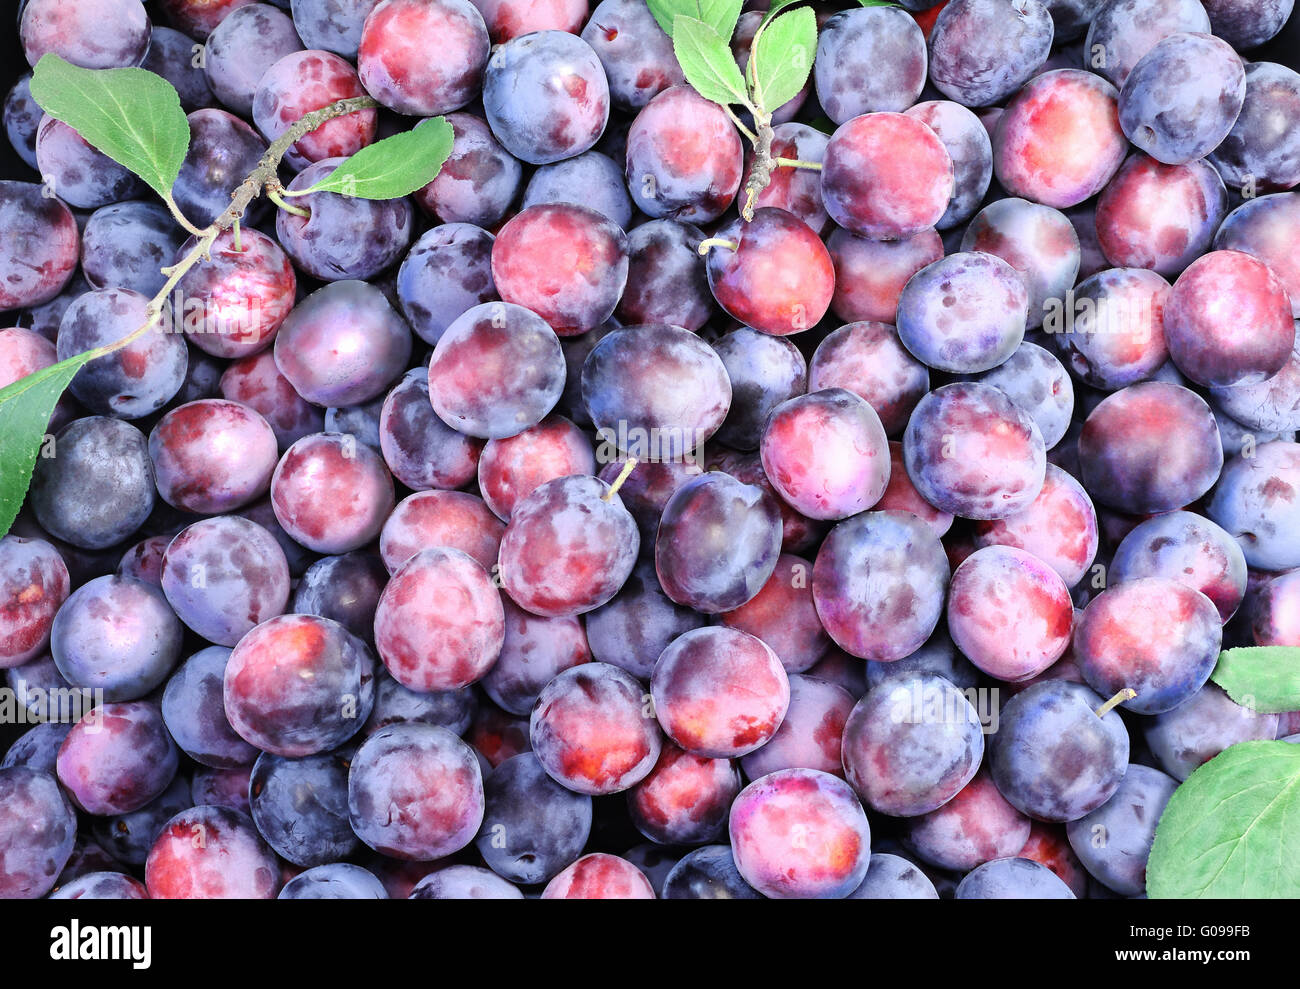 Large ripe plums in large quantities. Stock Photo